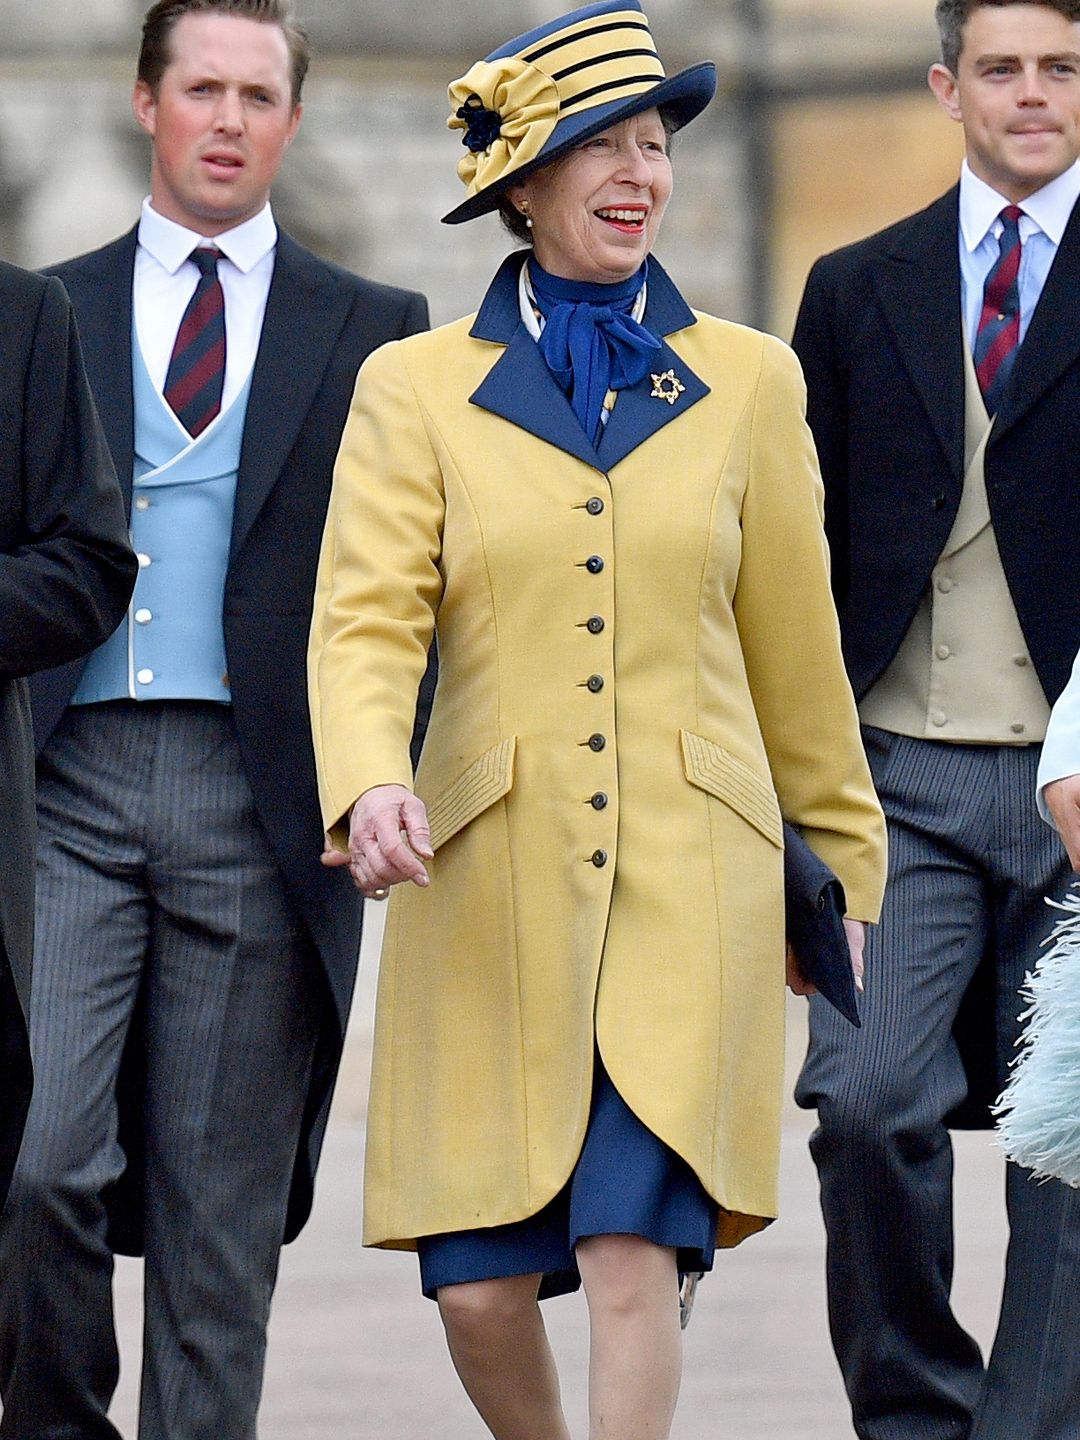 Princess Anne in a yellow and blue outfit at Lady Gabriella Windsor's wedding